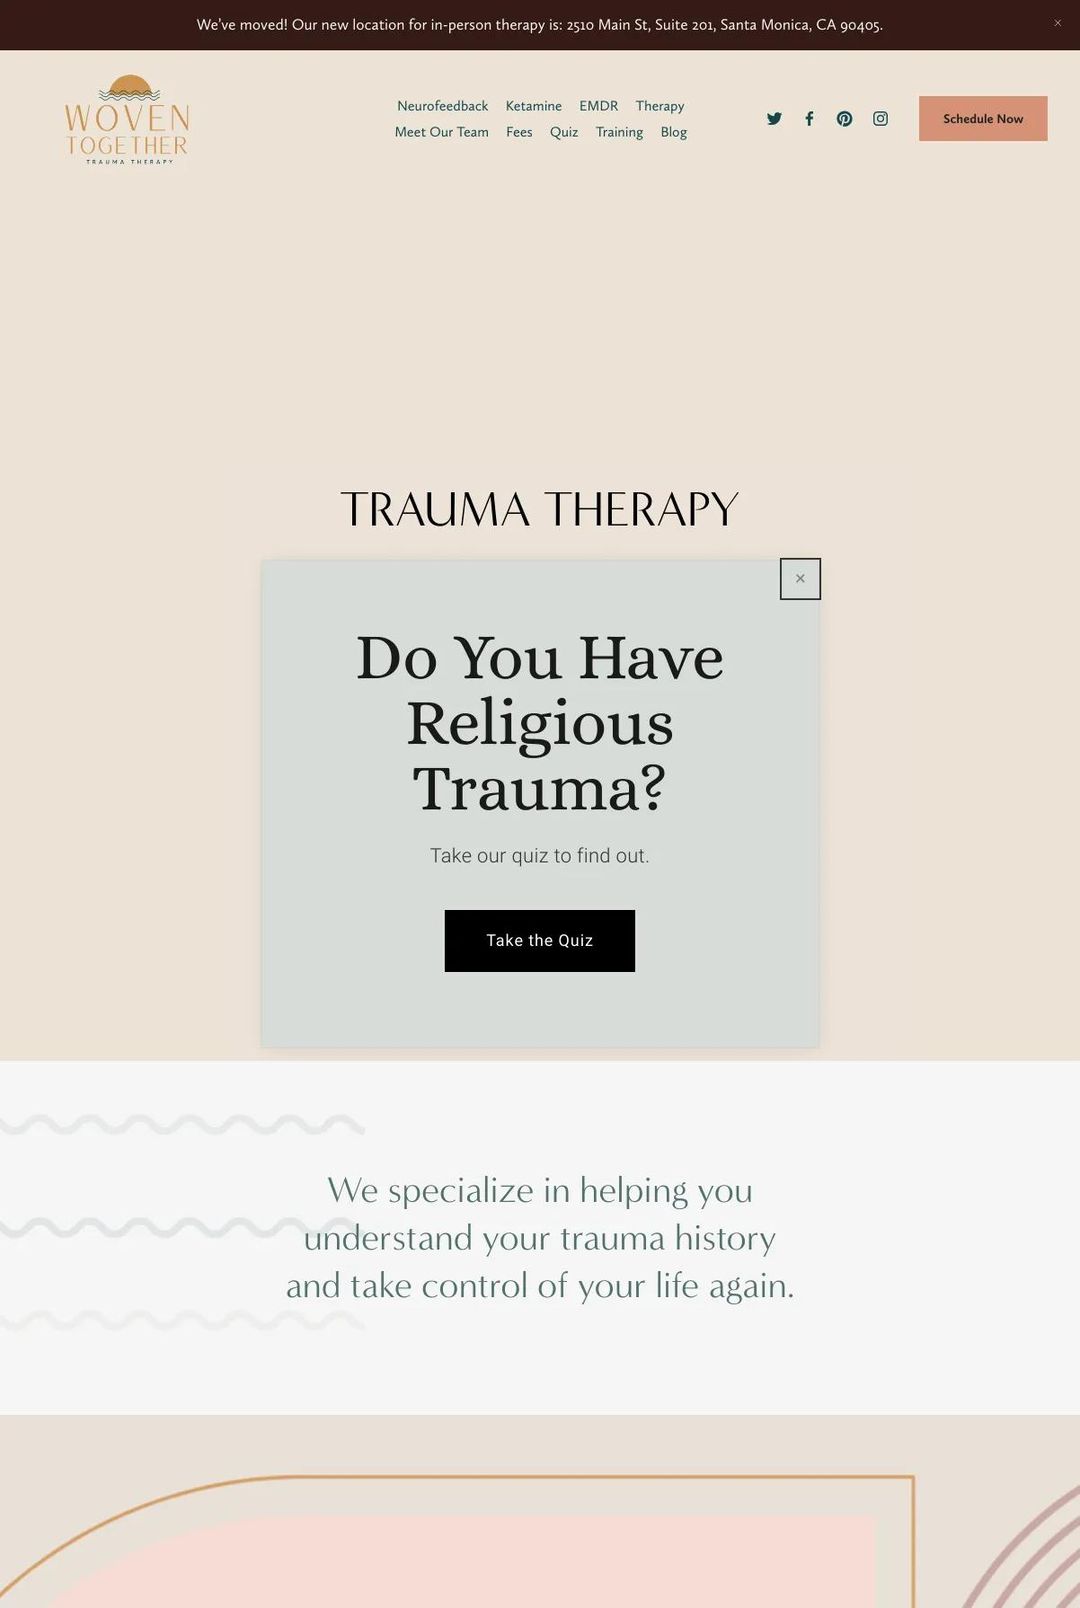 Screenshot 1 of Woven Together Trauma Therapy (Example Squarespace Therapist Website)